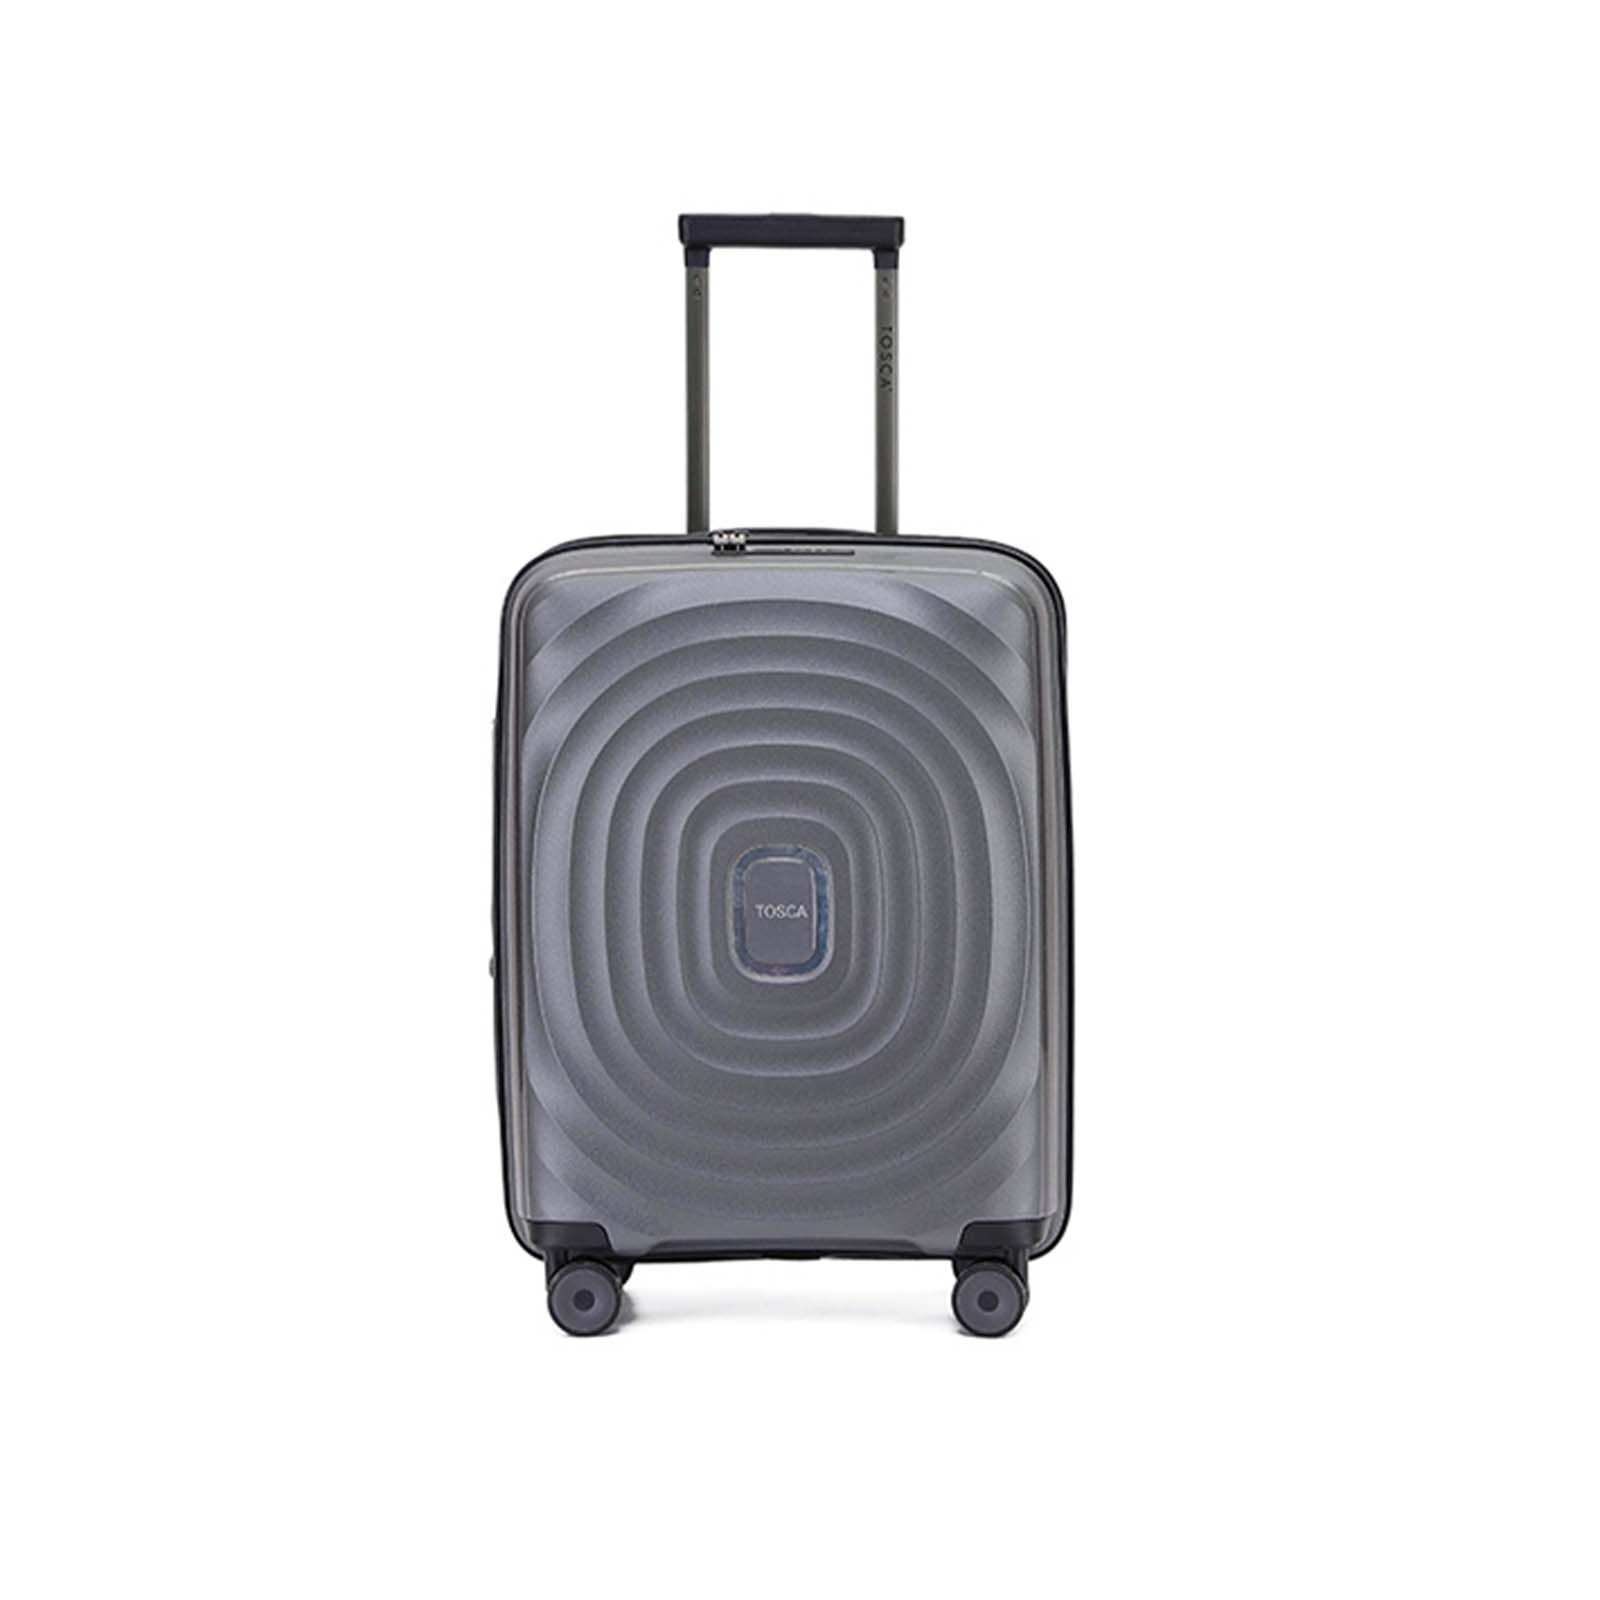 tosca-eclipse-4-wheel-55cm-carry-on-suitcase-charcoal-front